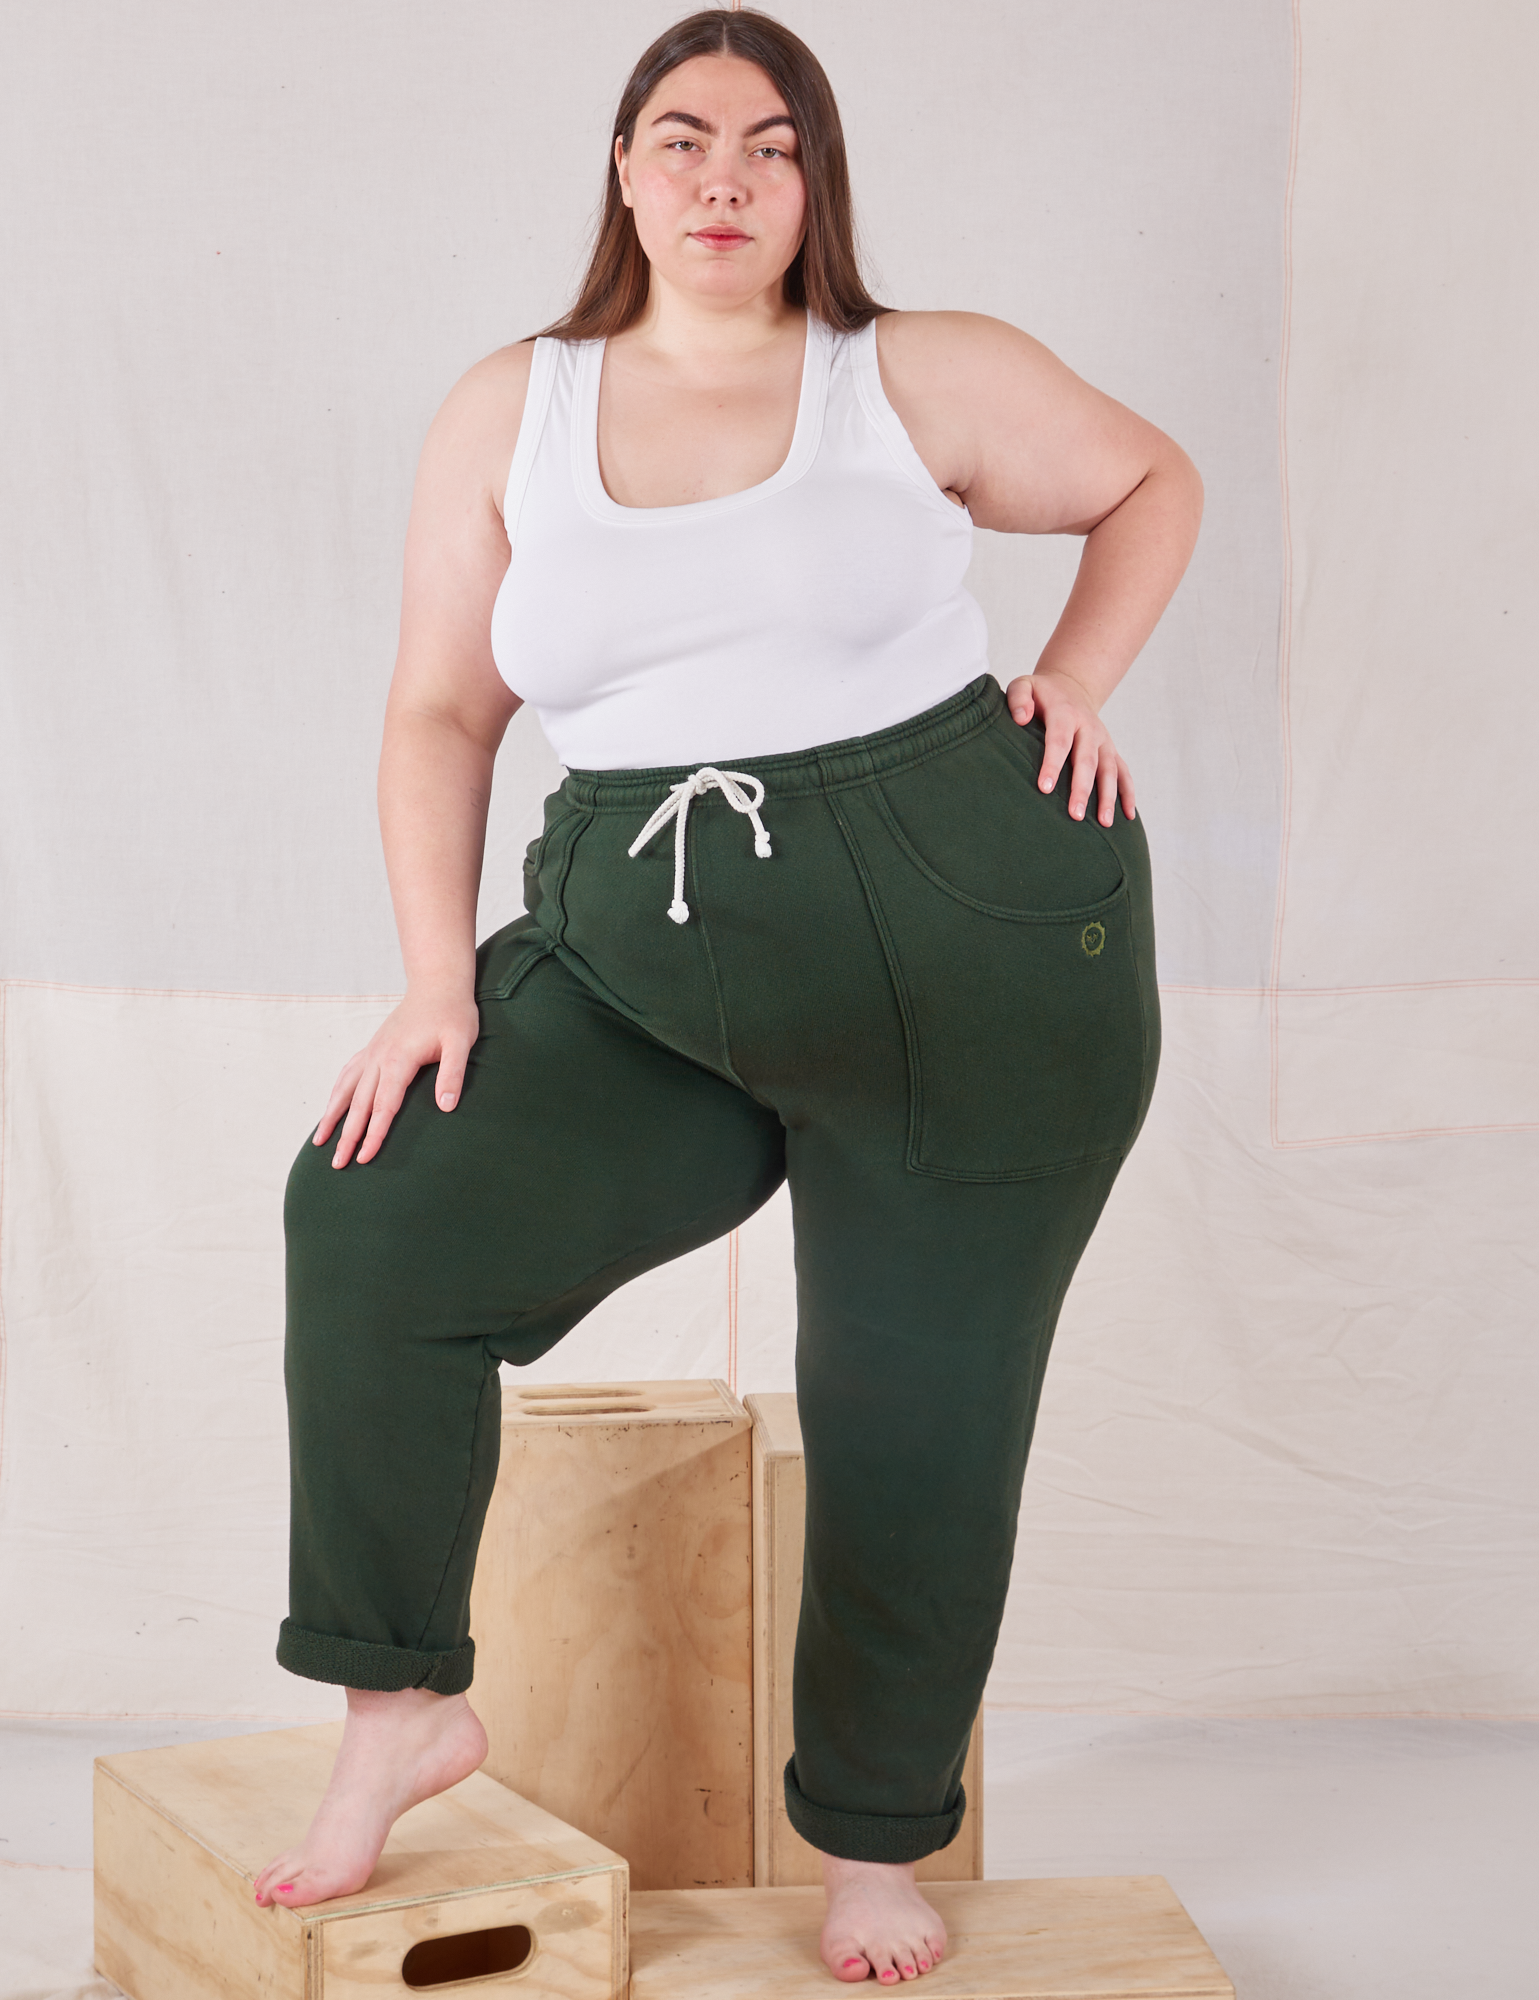 Marielena is 5'8" and wearing 1XL Rolled Cuff Sweat Pants in Swamp Green paired with vintage off-white Cropped Tank Top